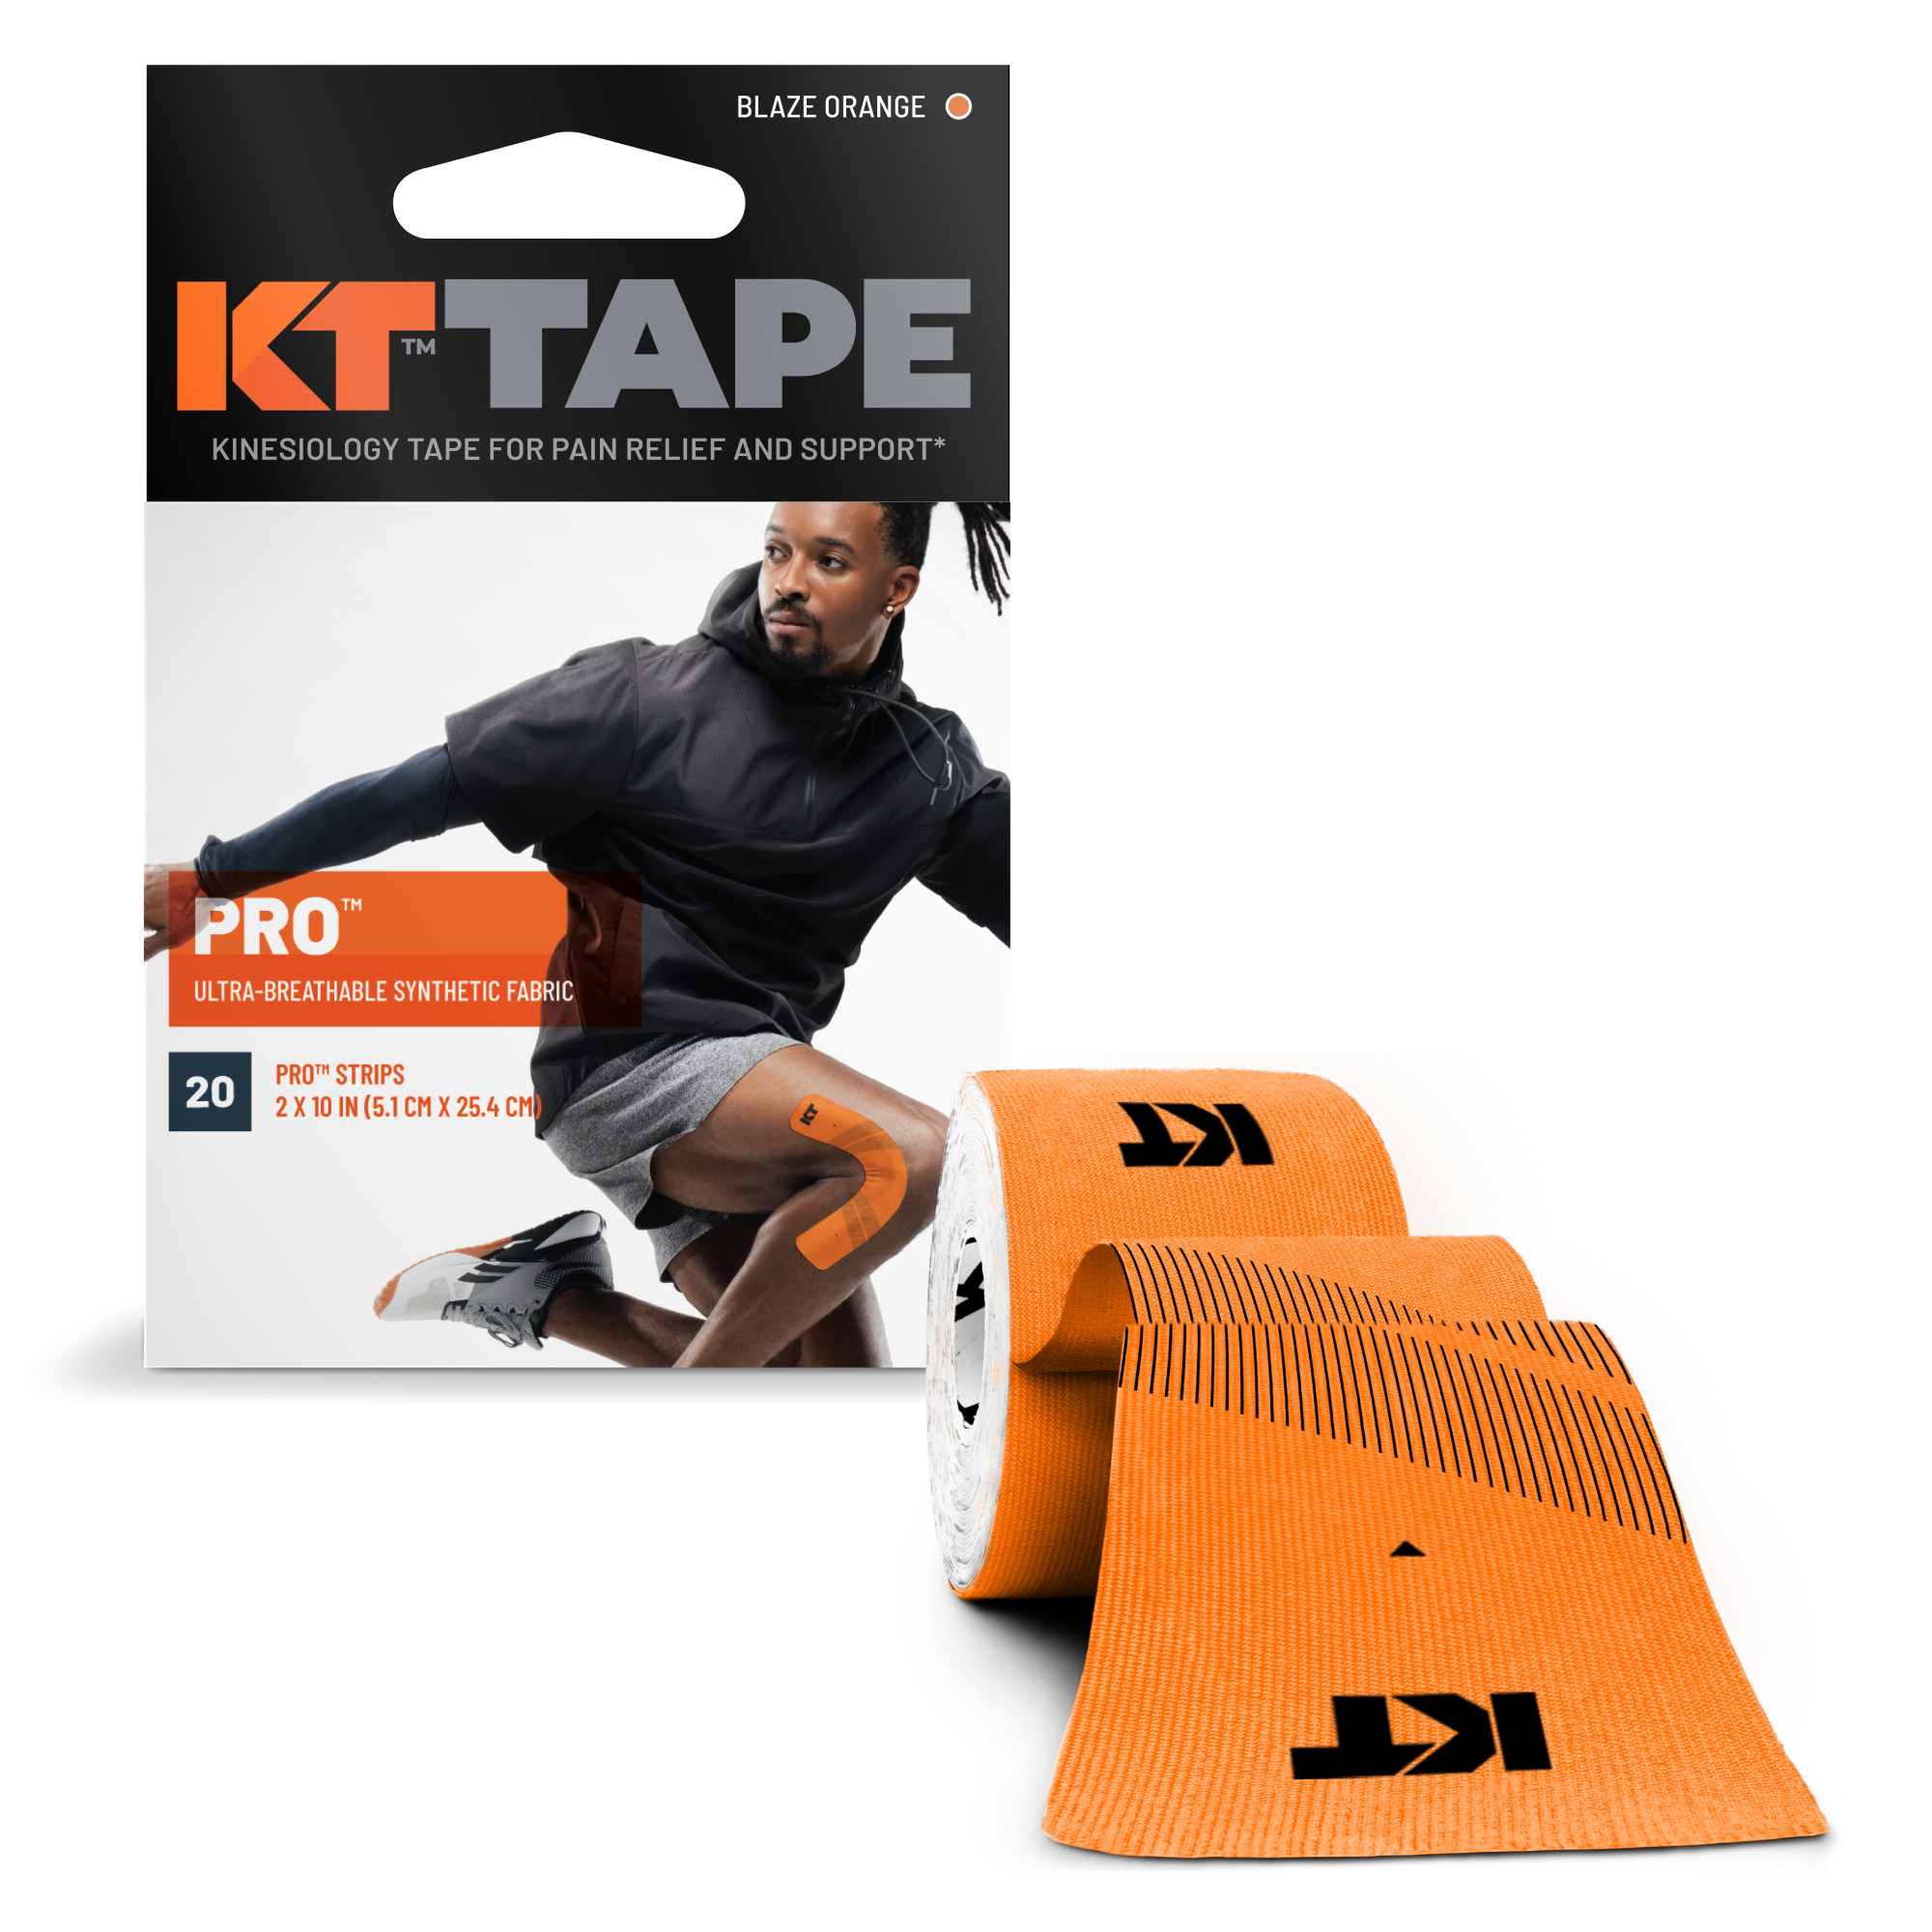 The KT Tape Pro Advantage: Why Quality Matters in Kinesiology Tape